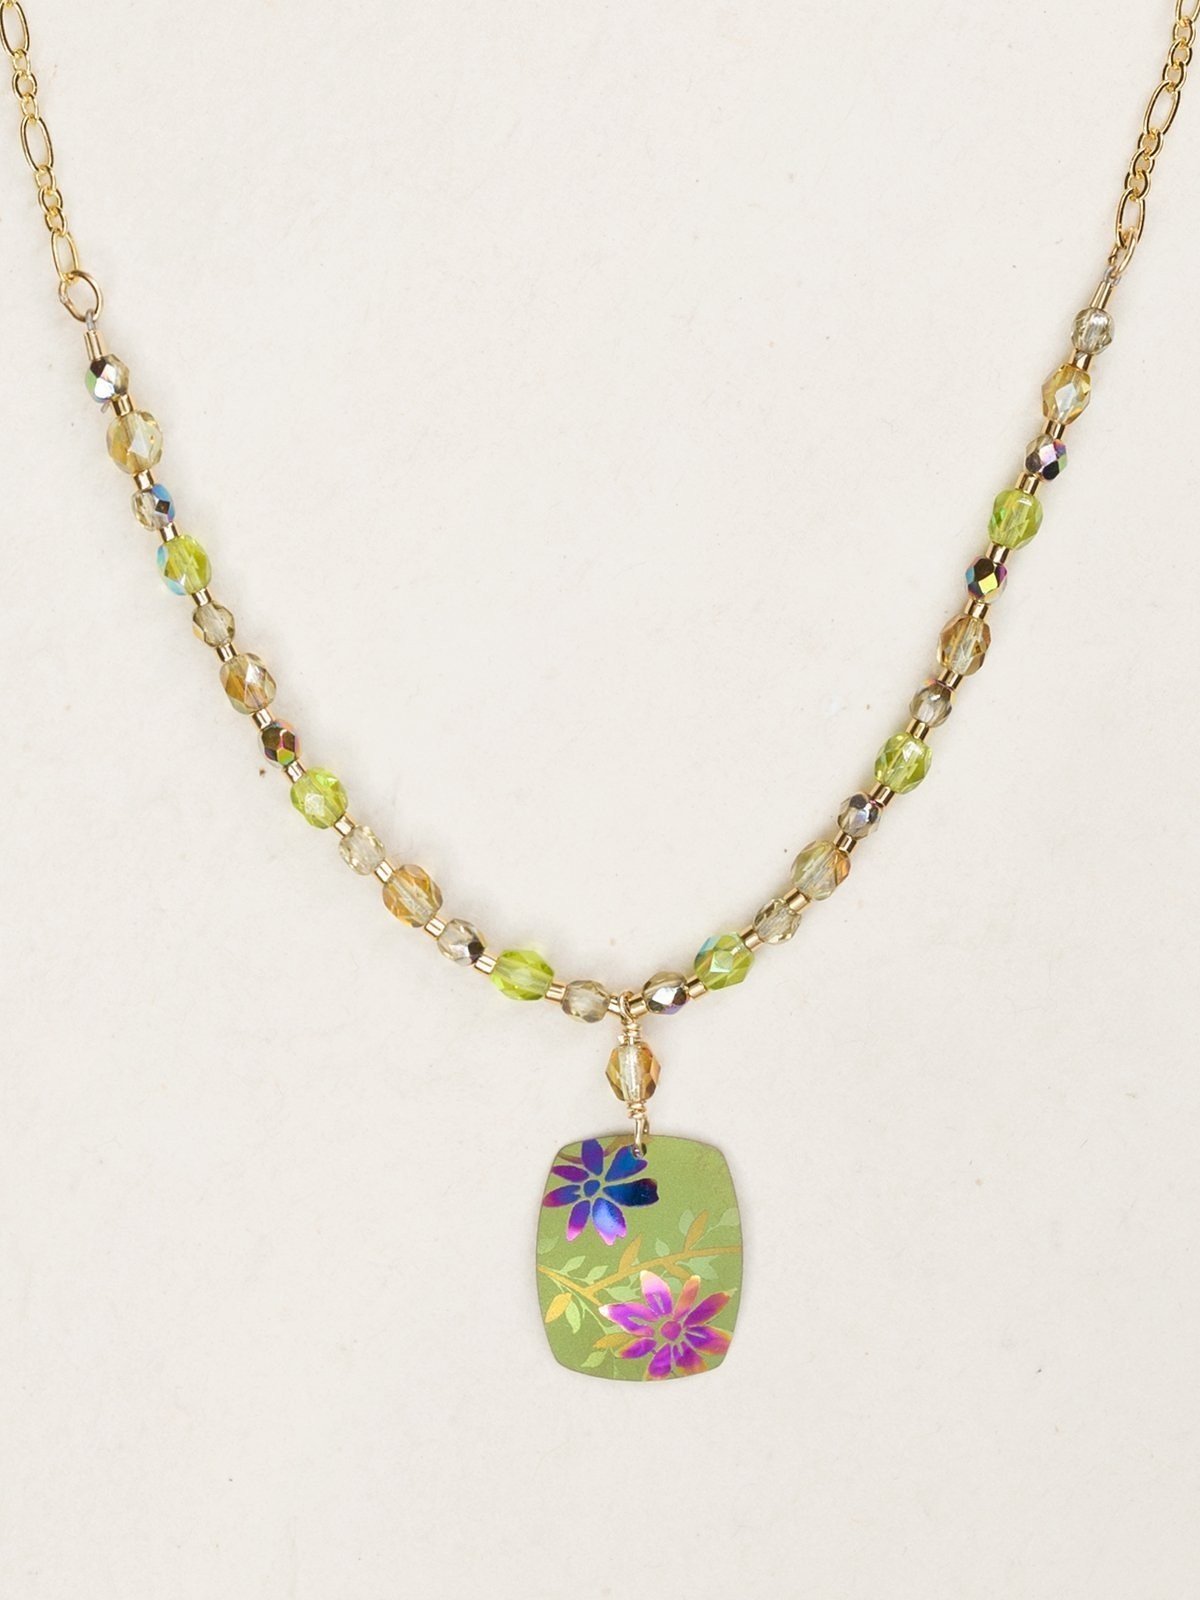 Green Meadow necklace by Holly Yashi